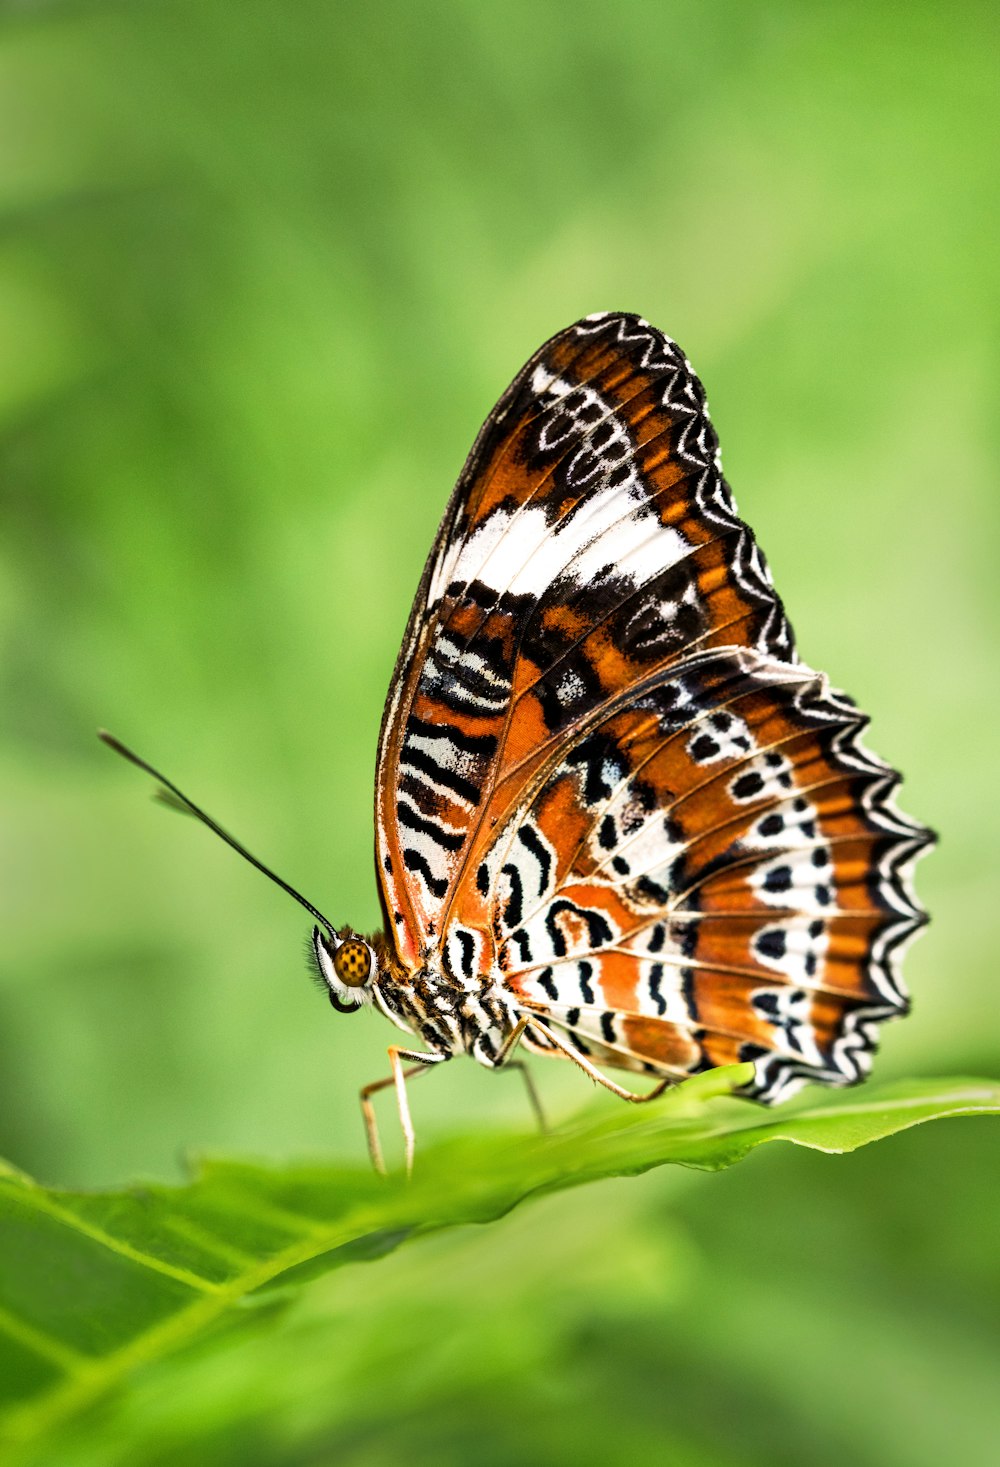 leopard lacewing butterfly perched on green leafed plant